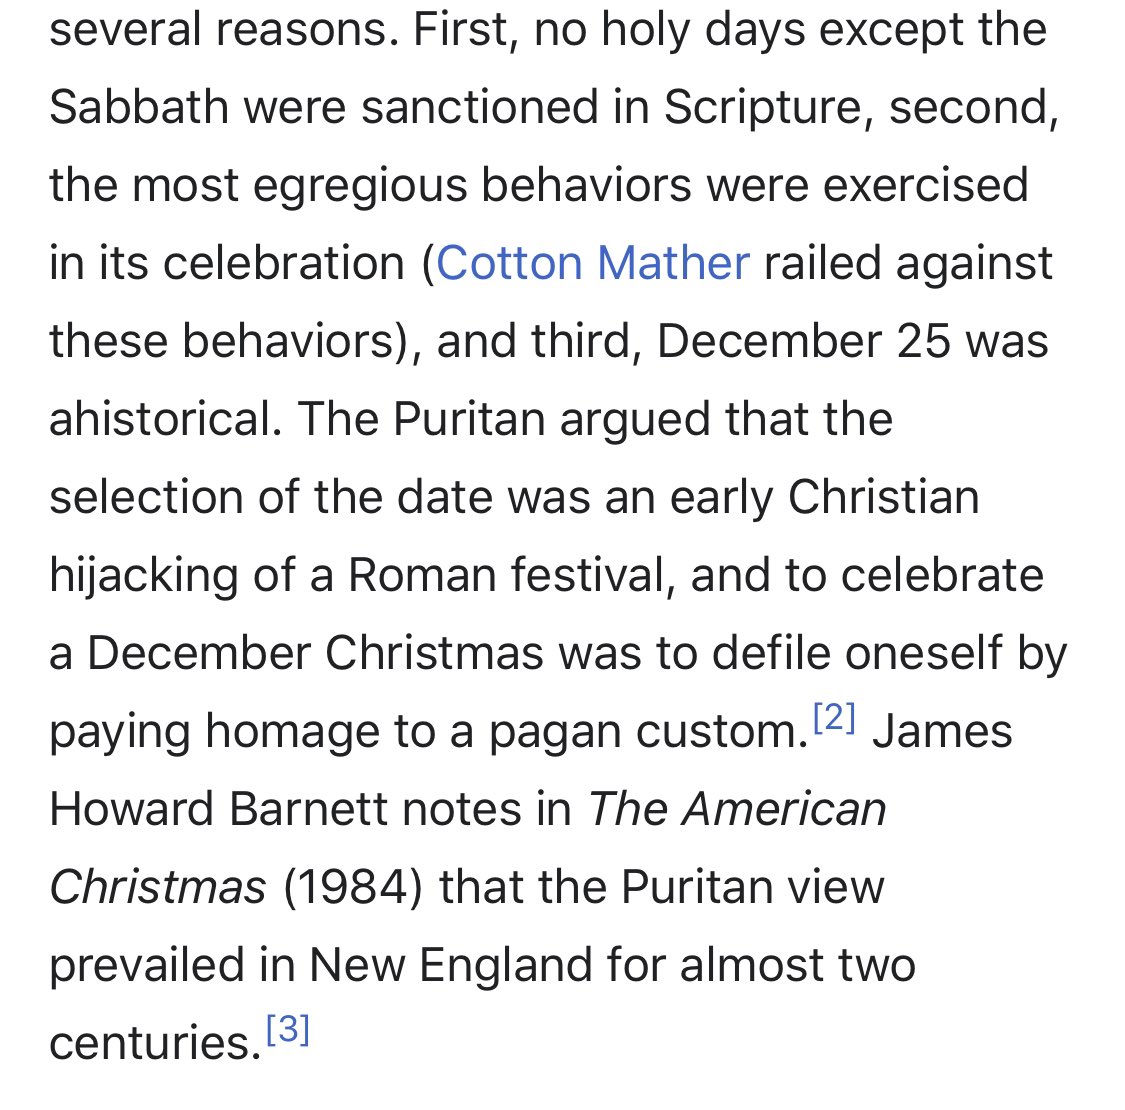 What did they use to justify their decision. Well, they held that Christmas was a Catholic Idolatry Day, which had its roots in, YOU GUESSED IT, pagan celebrations!!!!